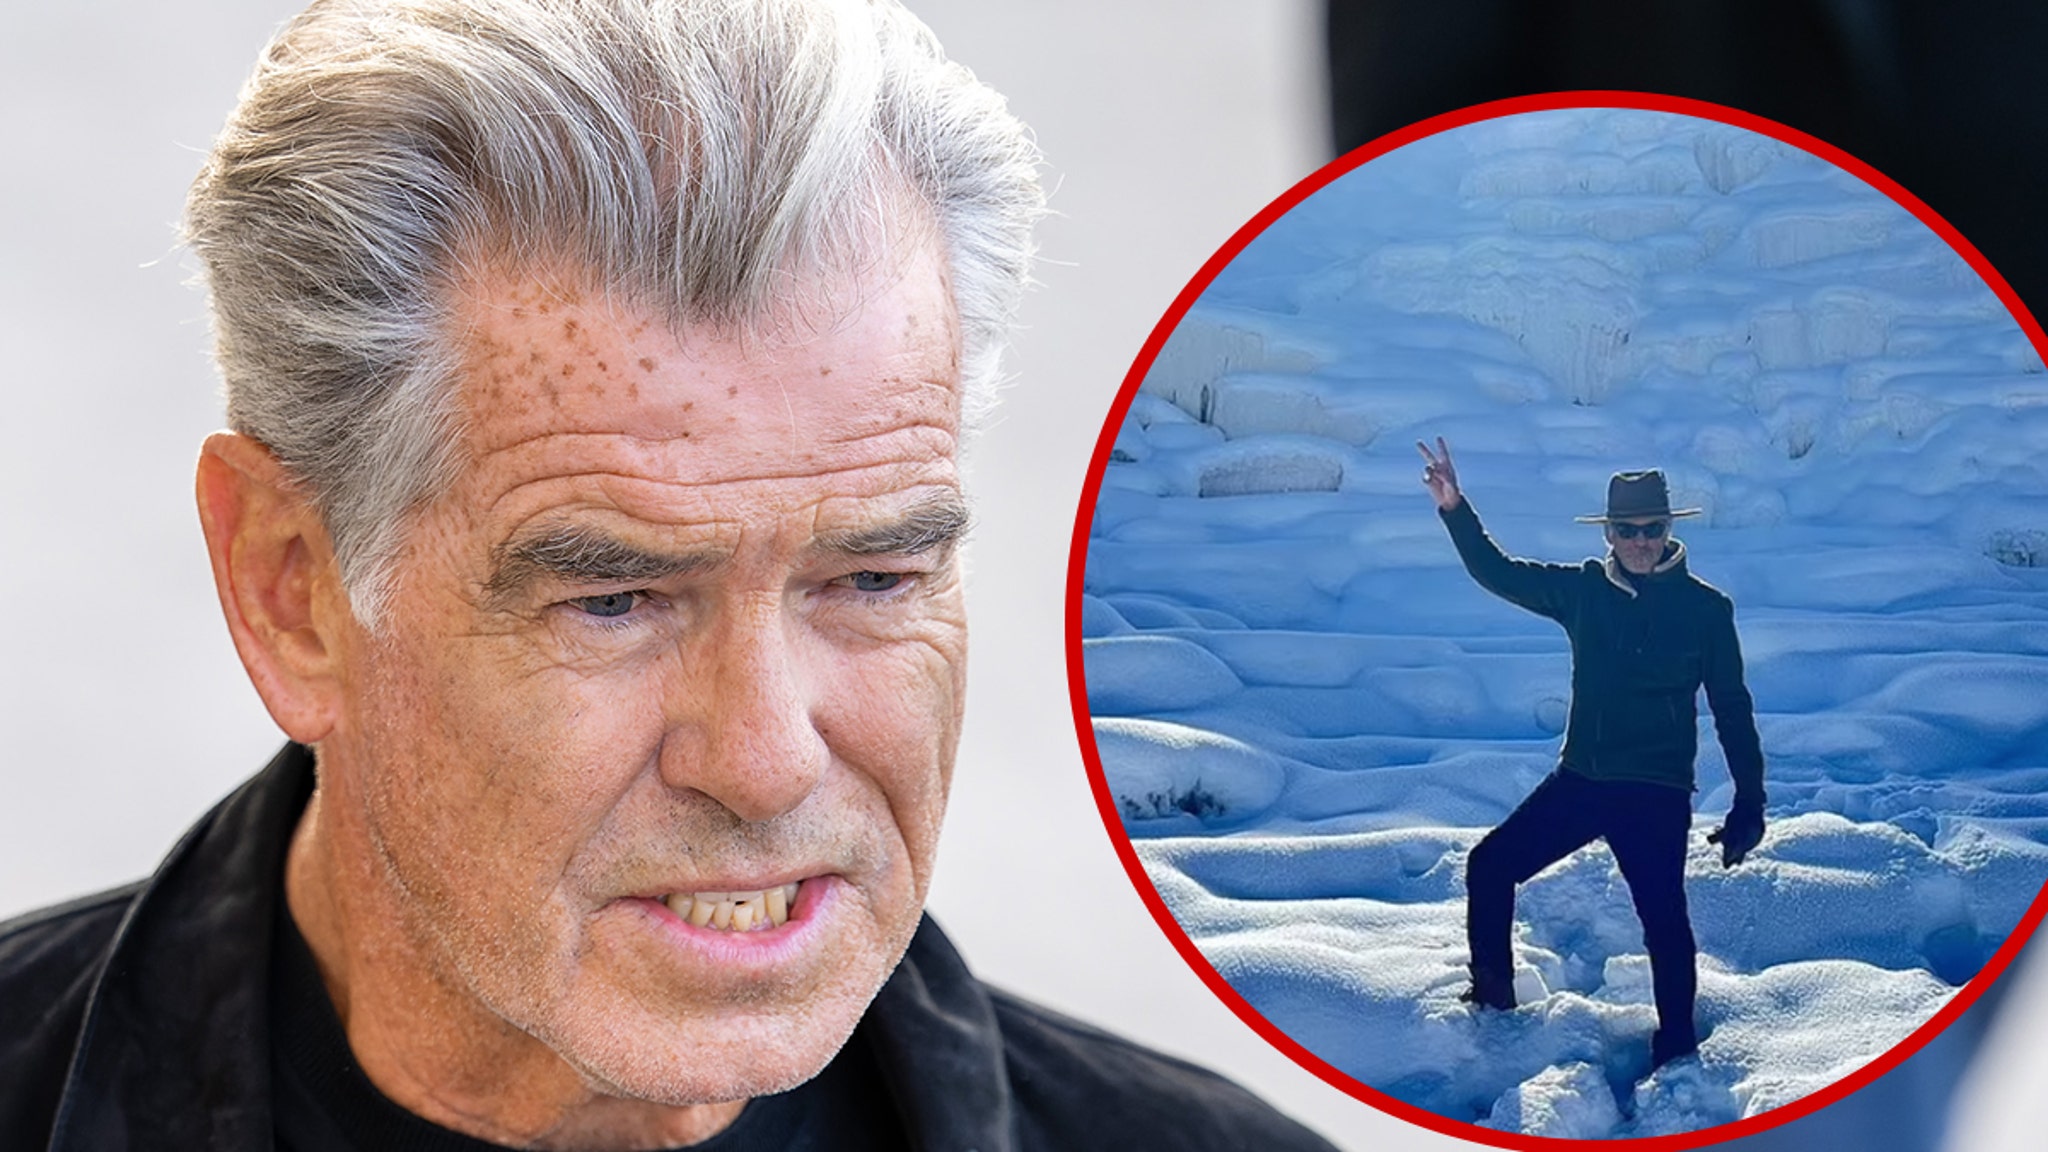 Pierce Brosnan Pleads Not Guilty to Illegal Hiking Charges